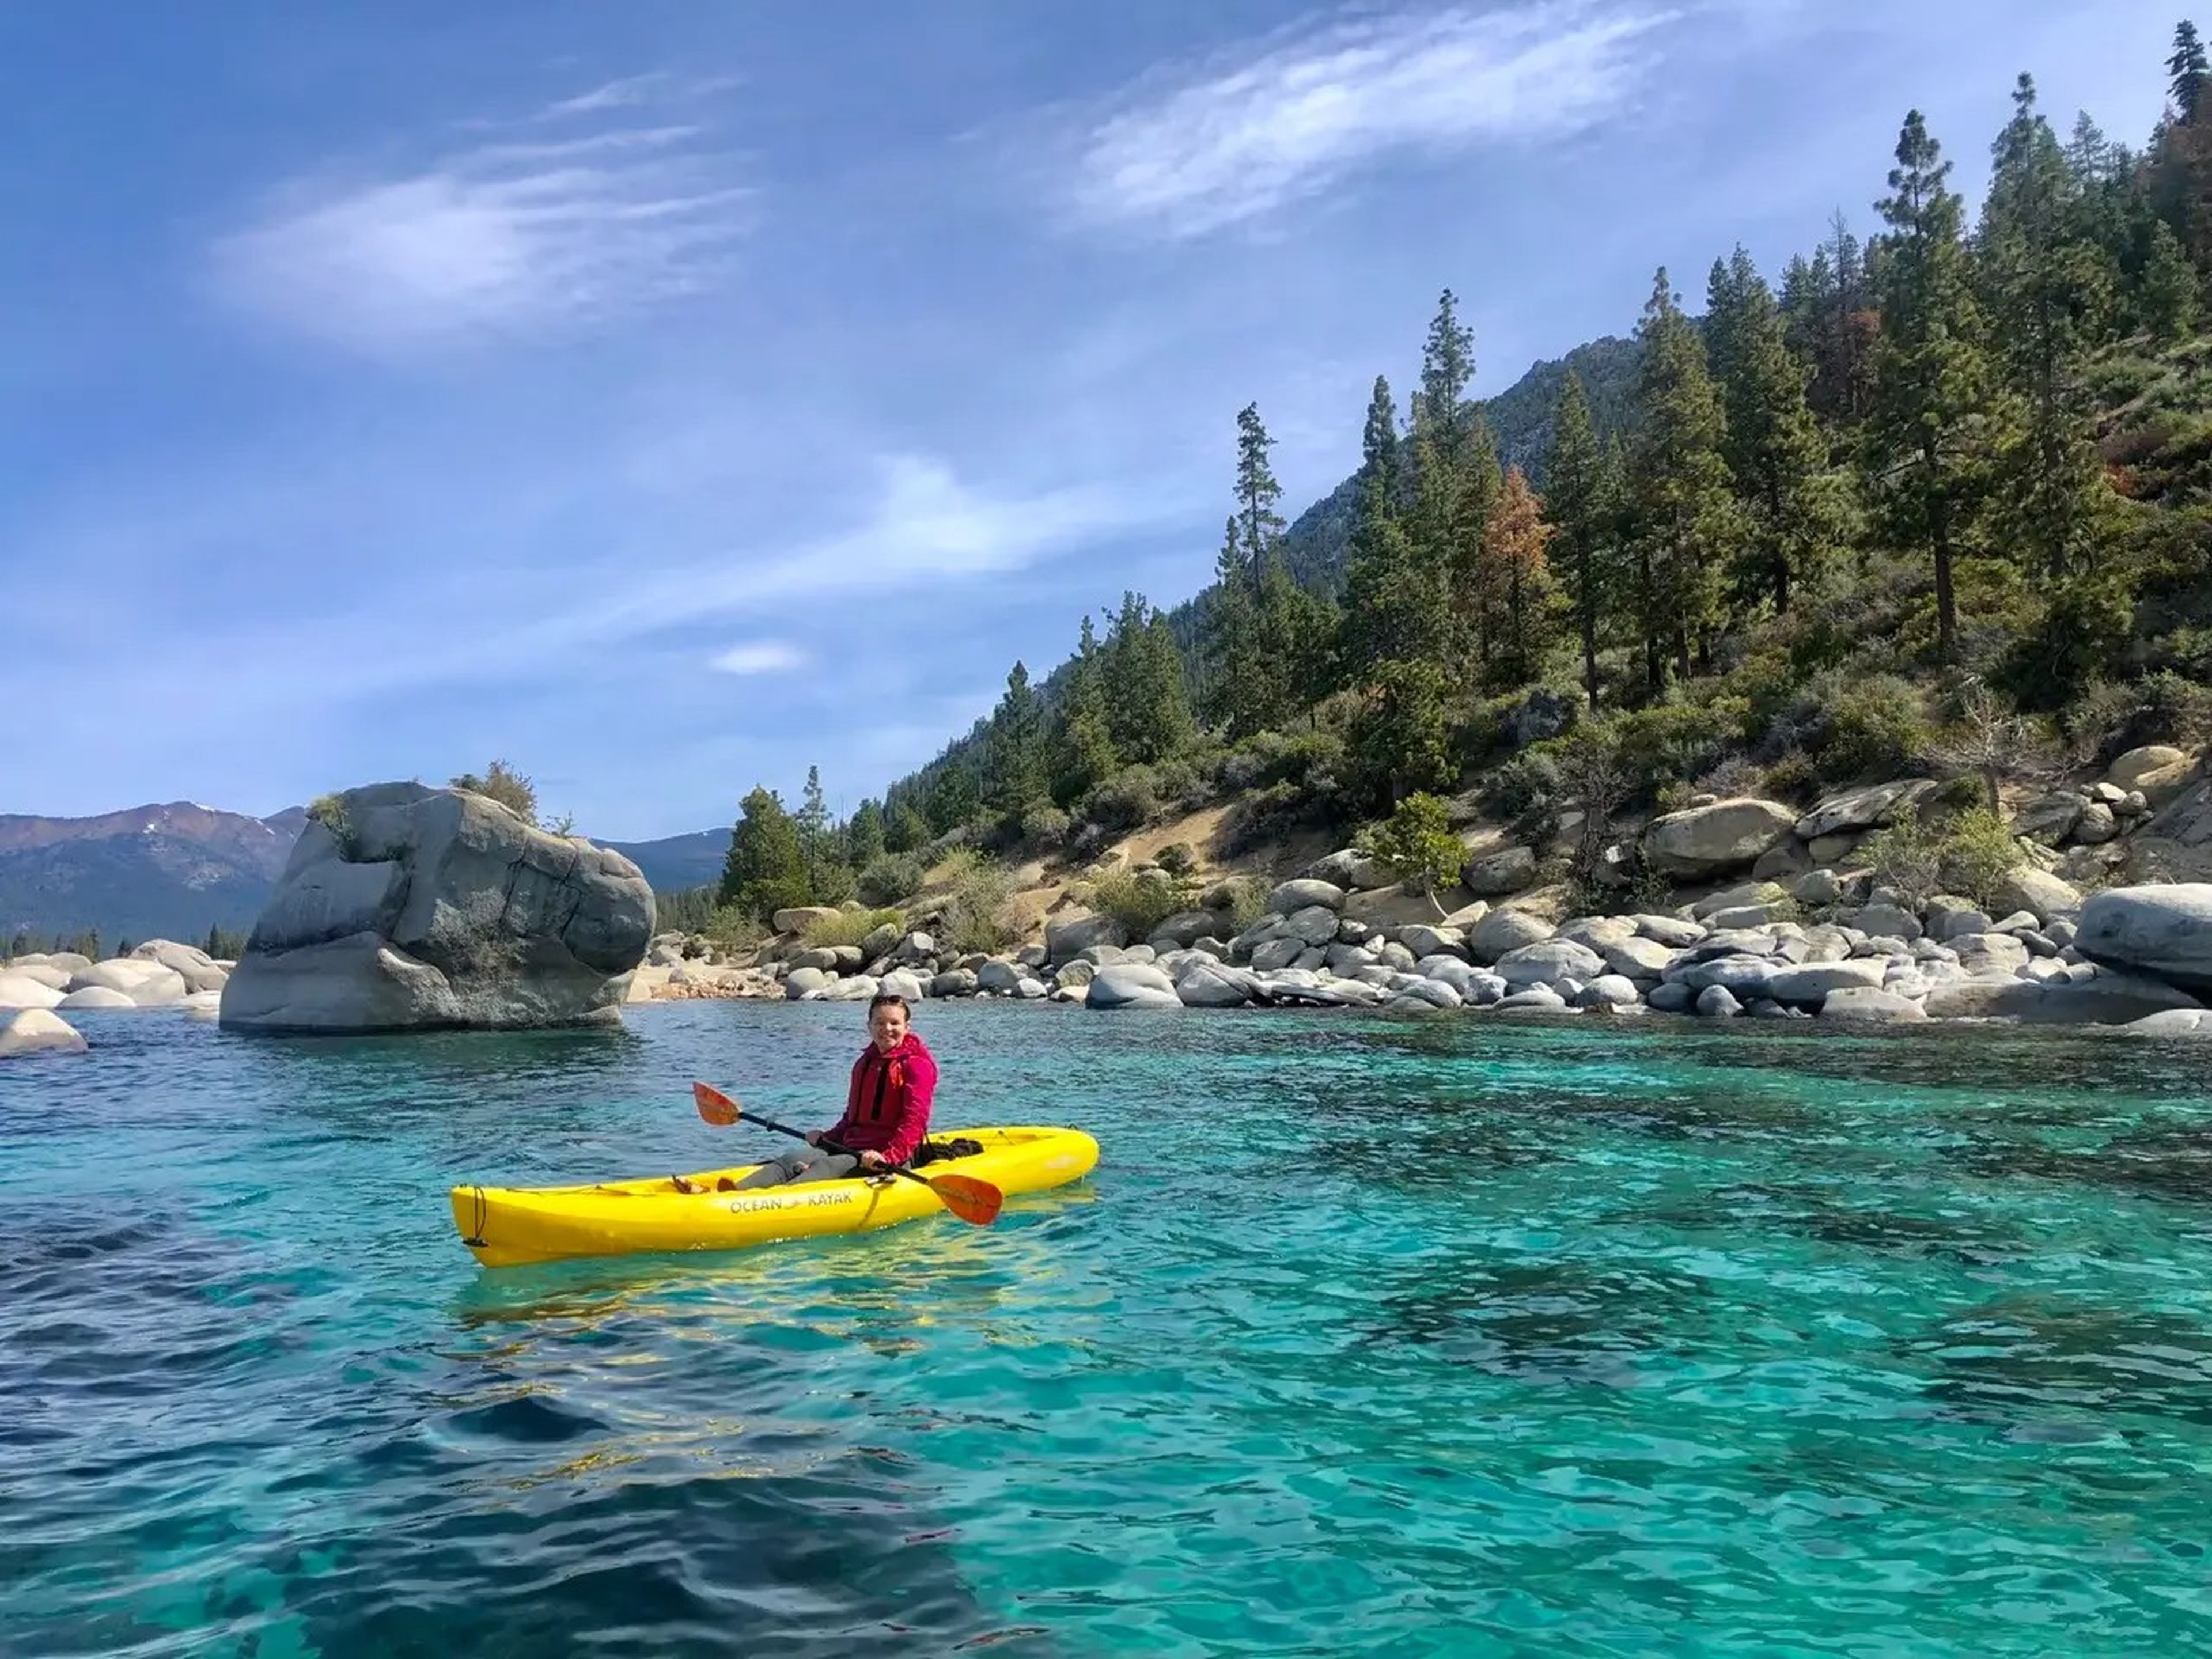 Author Nicole Jordan in a yellow boat on bright-blue waters in front of trees and rocks